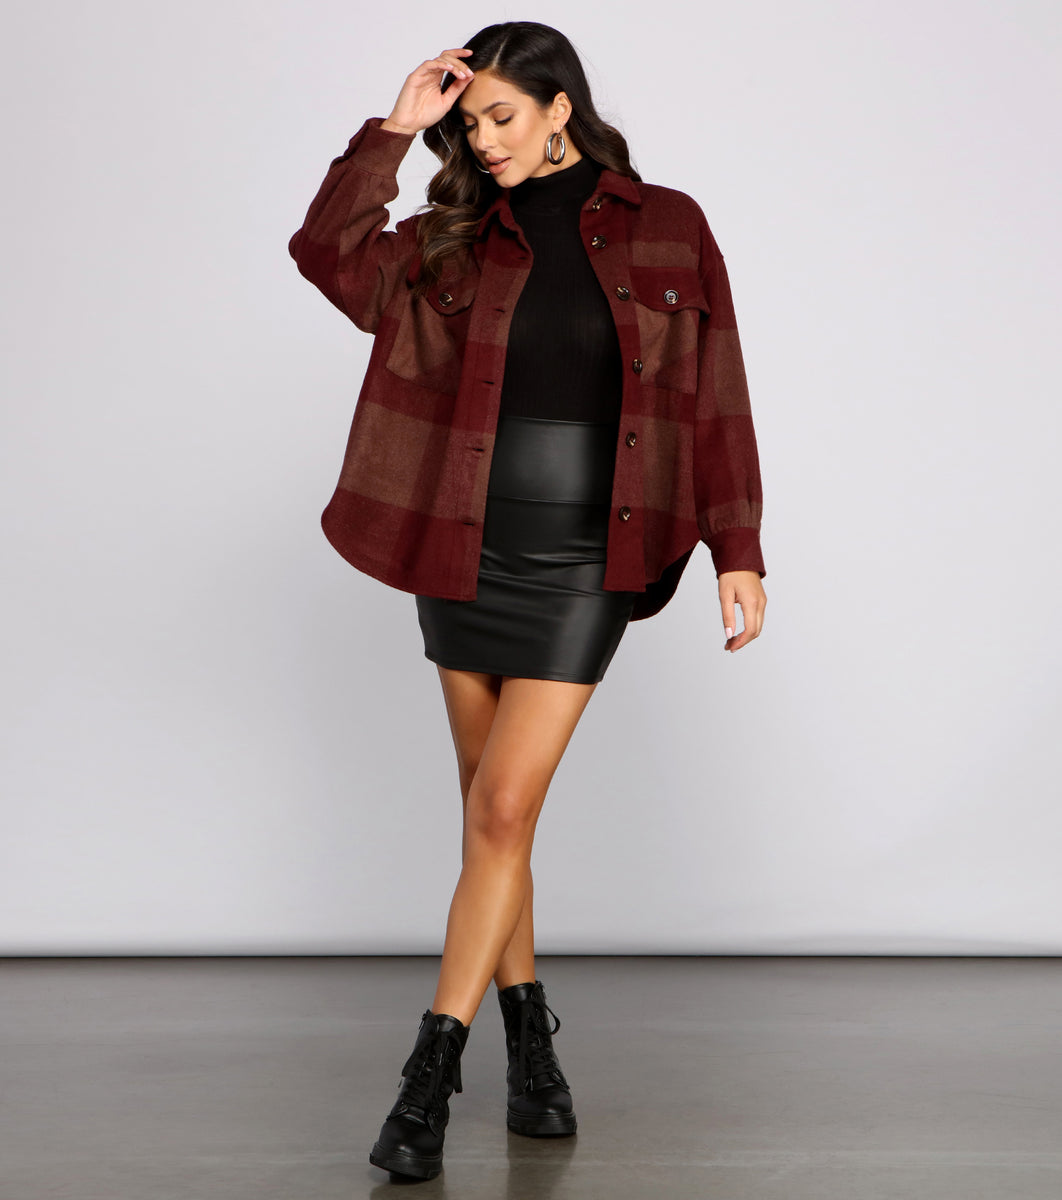 Edgy-Chic Faux Leather Mini Skirt